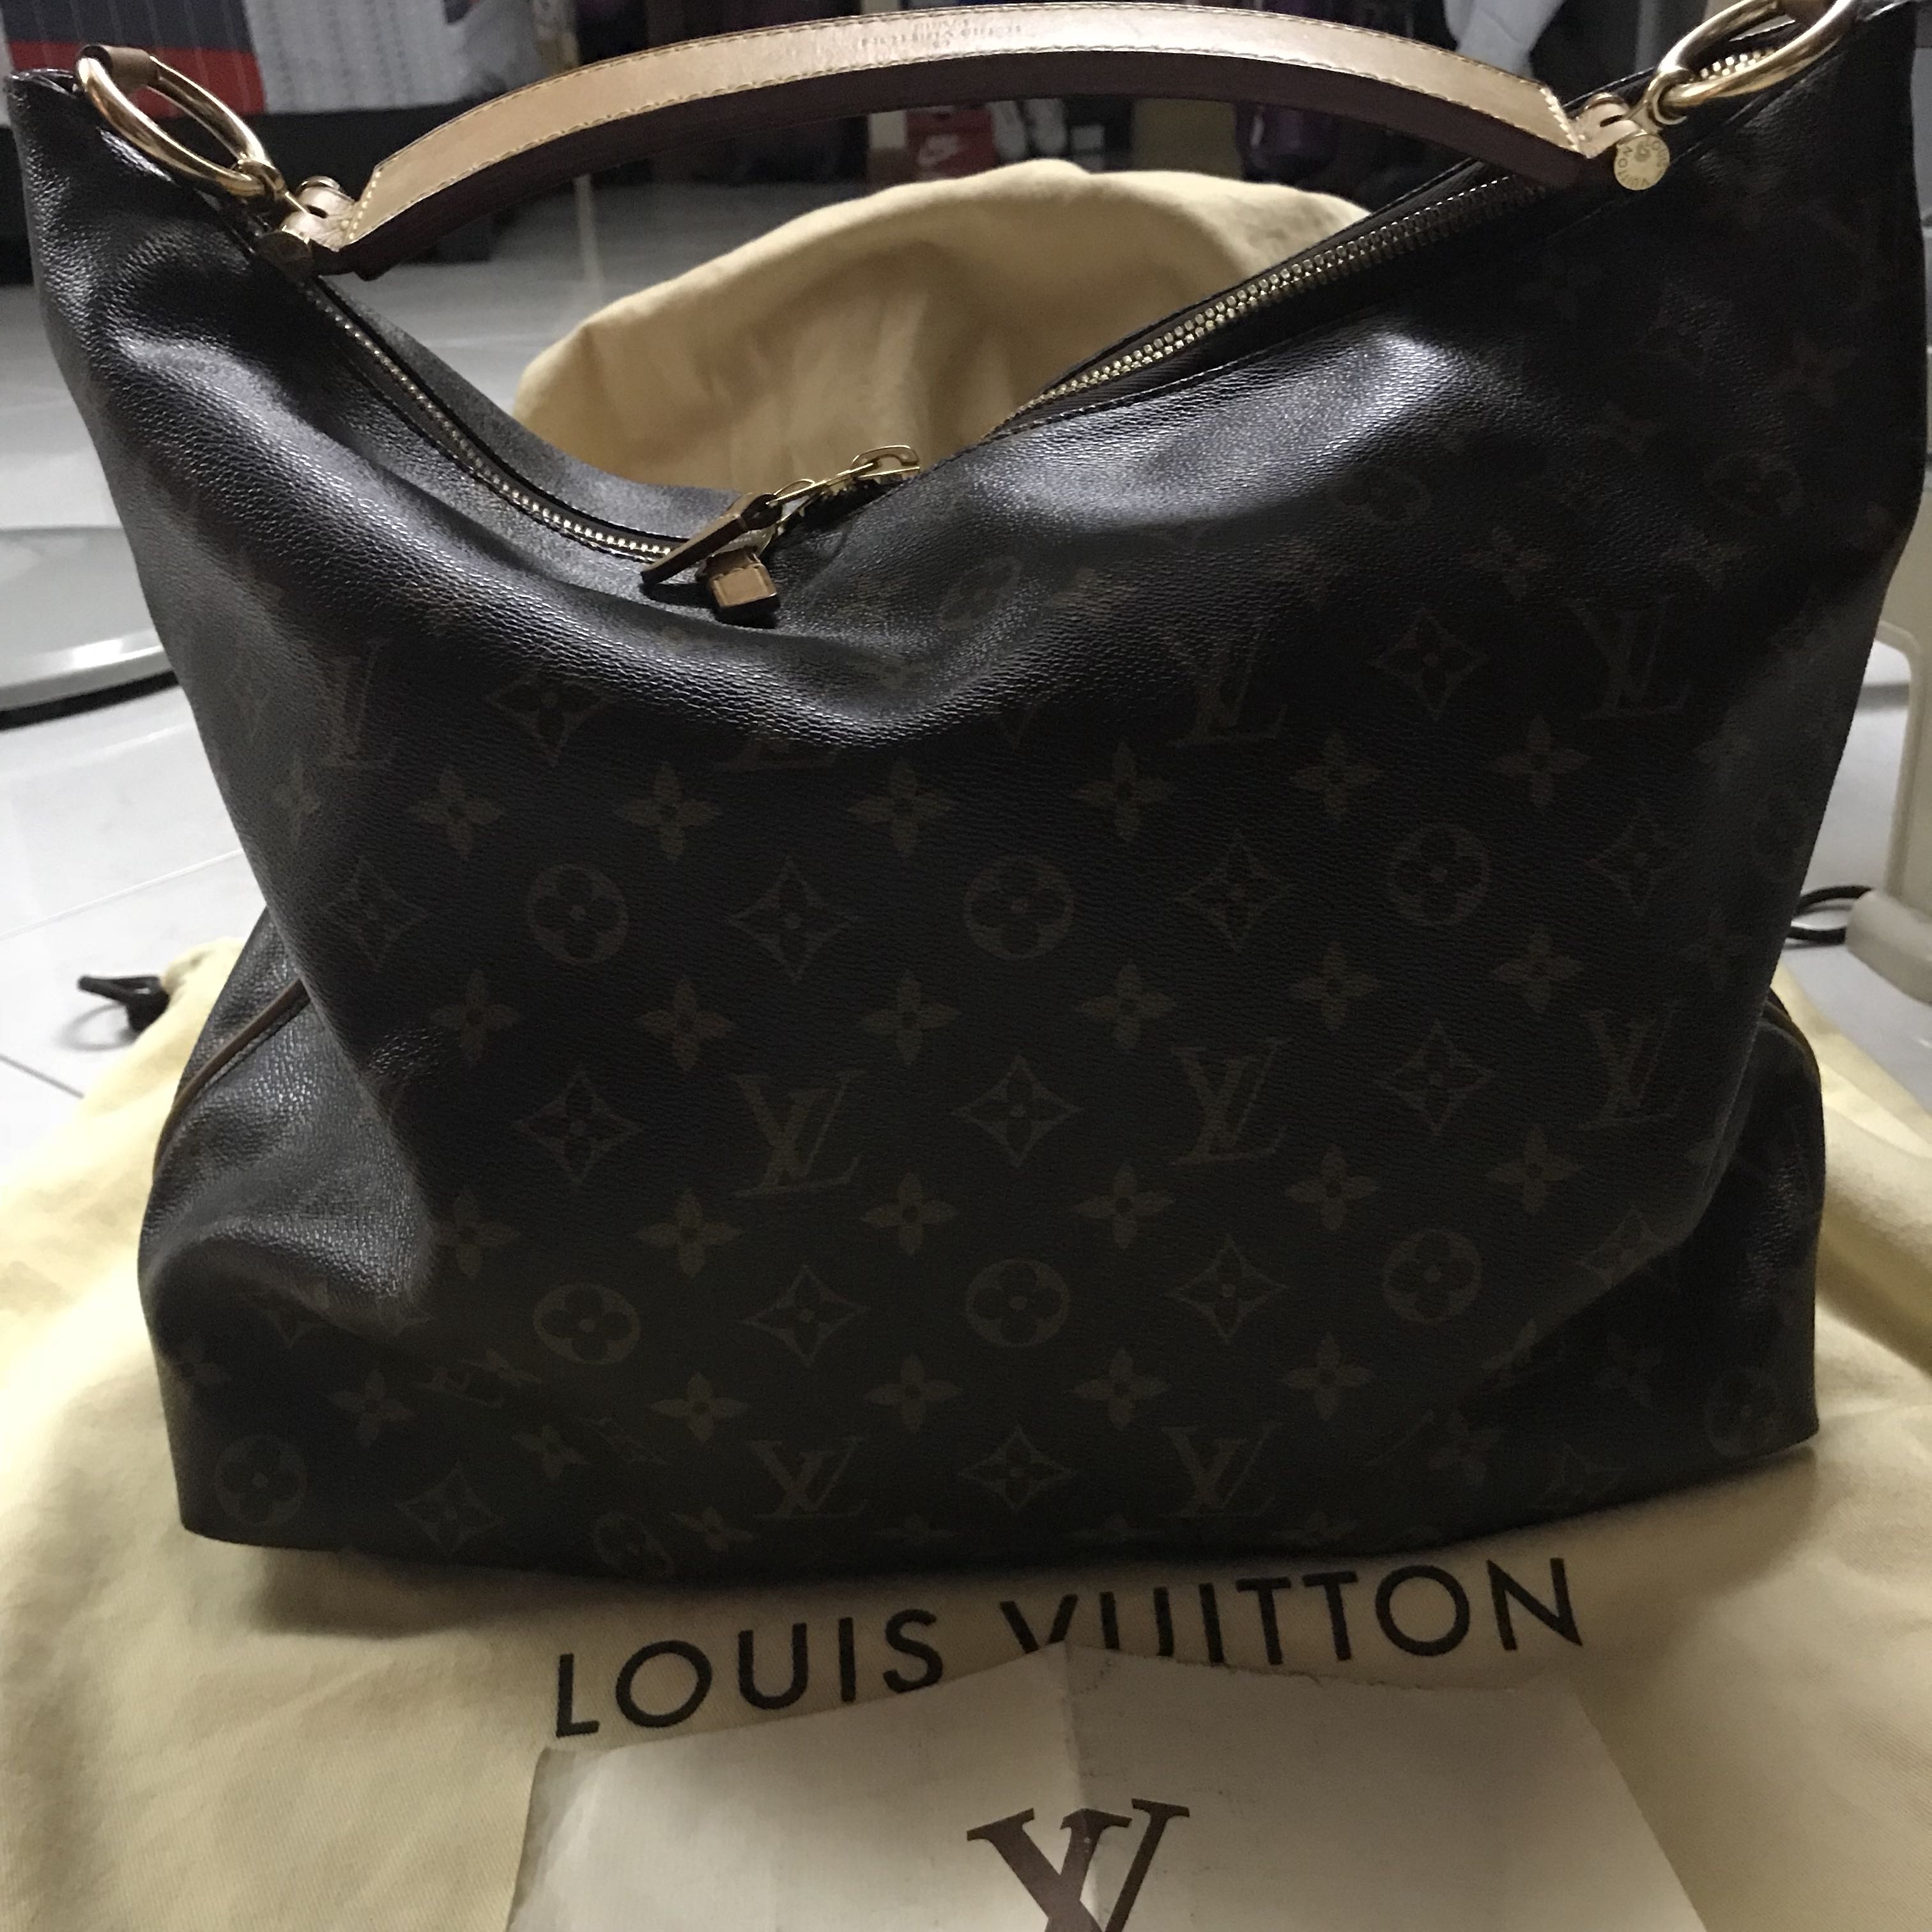 LOUIS VUITTON SULLY MM timeless shoulder bag, 2012 collection